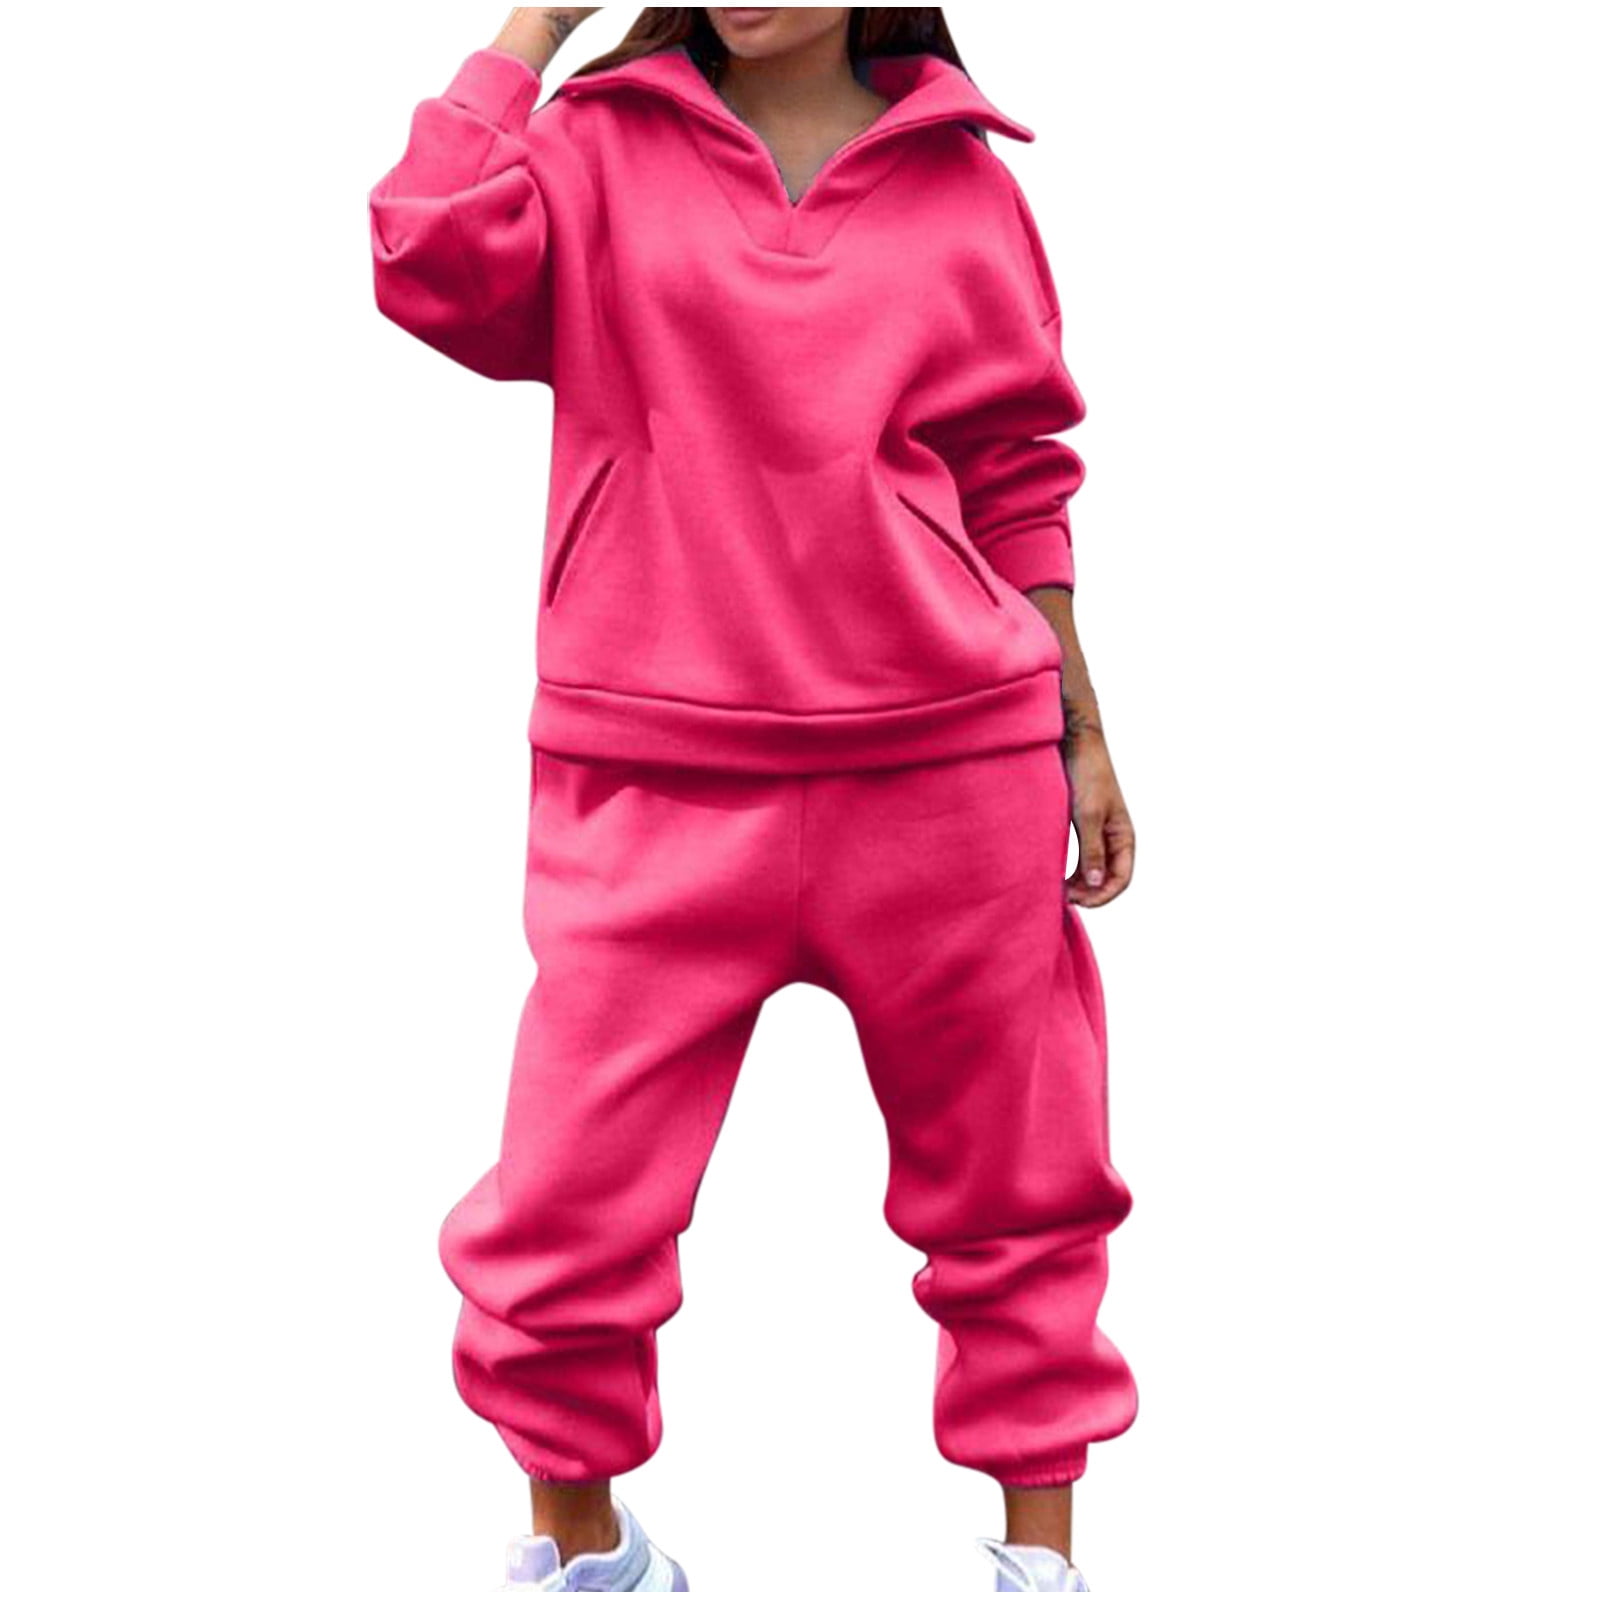 RQYYD Women's Two Piece Outfits Tracksuits Solid Color Long Sleeve V Neck  Top Jogger Pants Set Hoodie 2 Piece Jogging Suits with Pockets Red S 